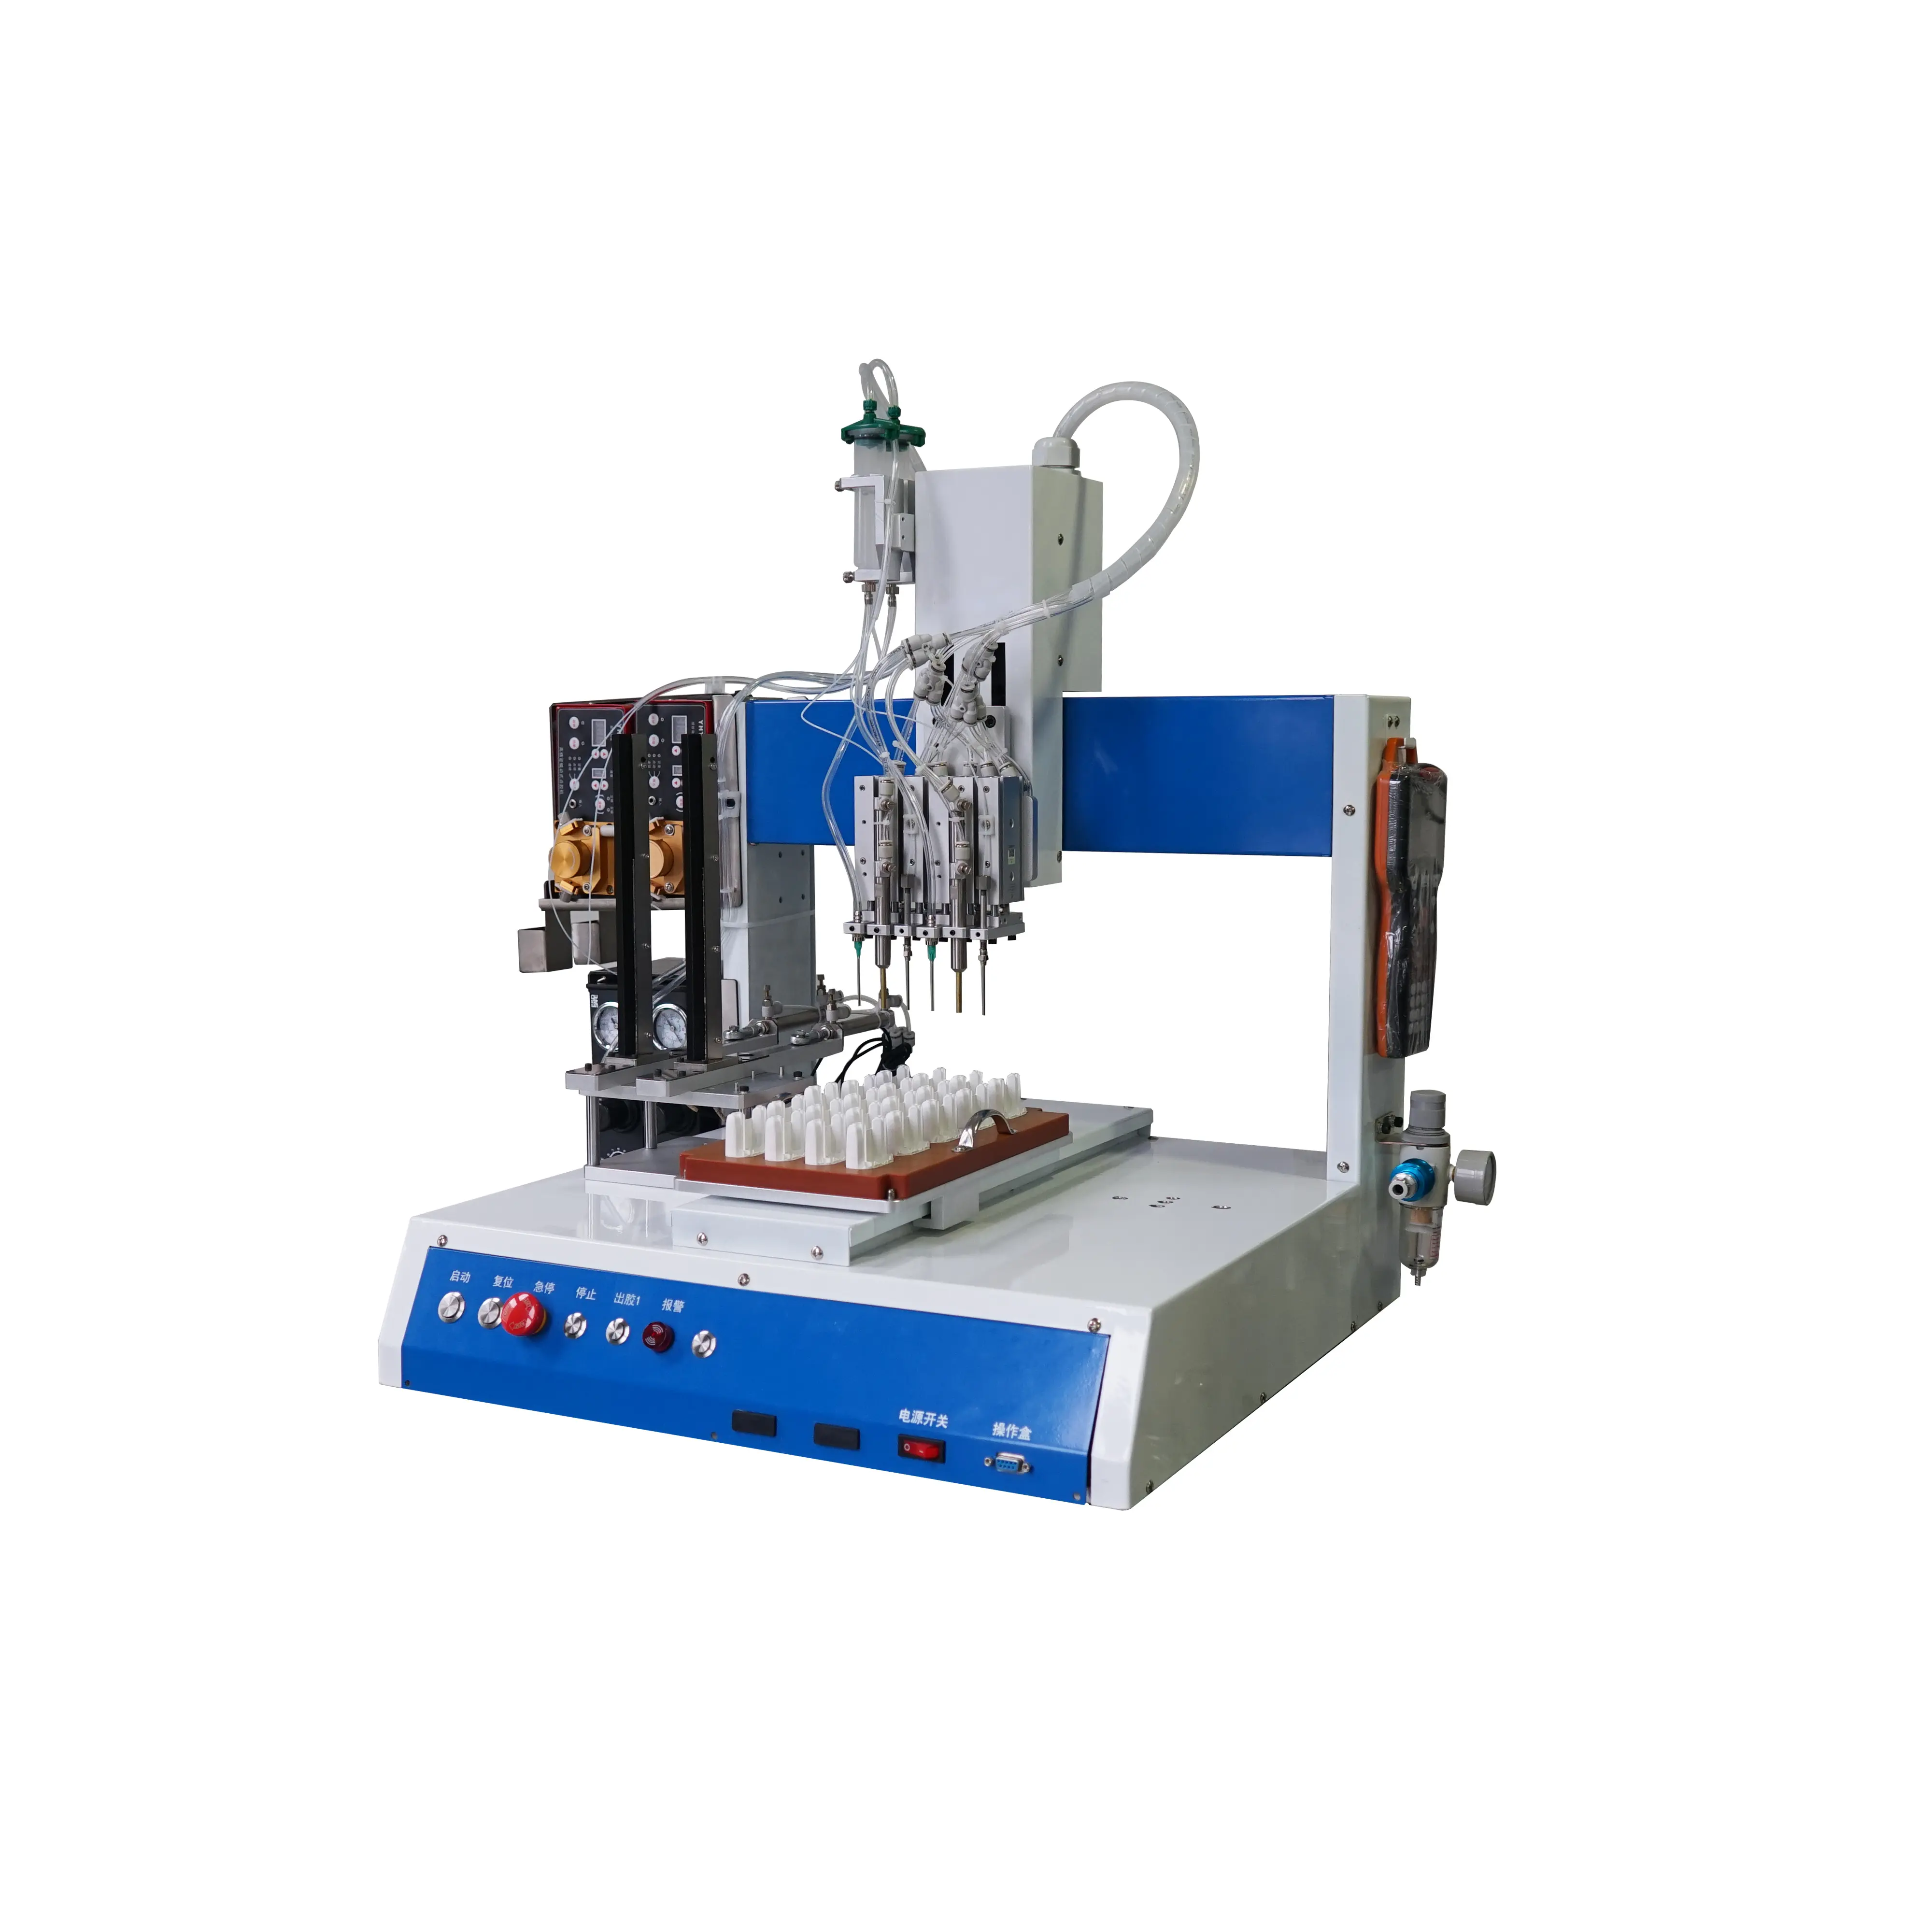 Automatic Glue Dispensing and Magnets Assembly Automatic Machine Model441IIC Magnets parts assembly machine dispenser